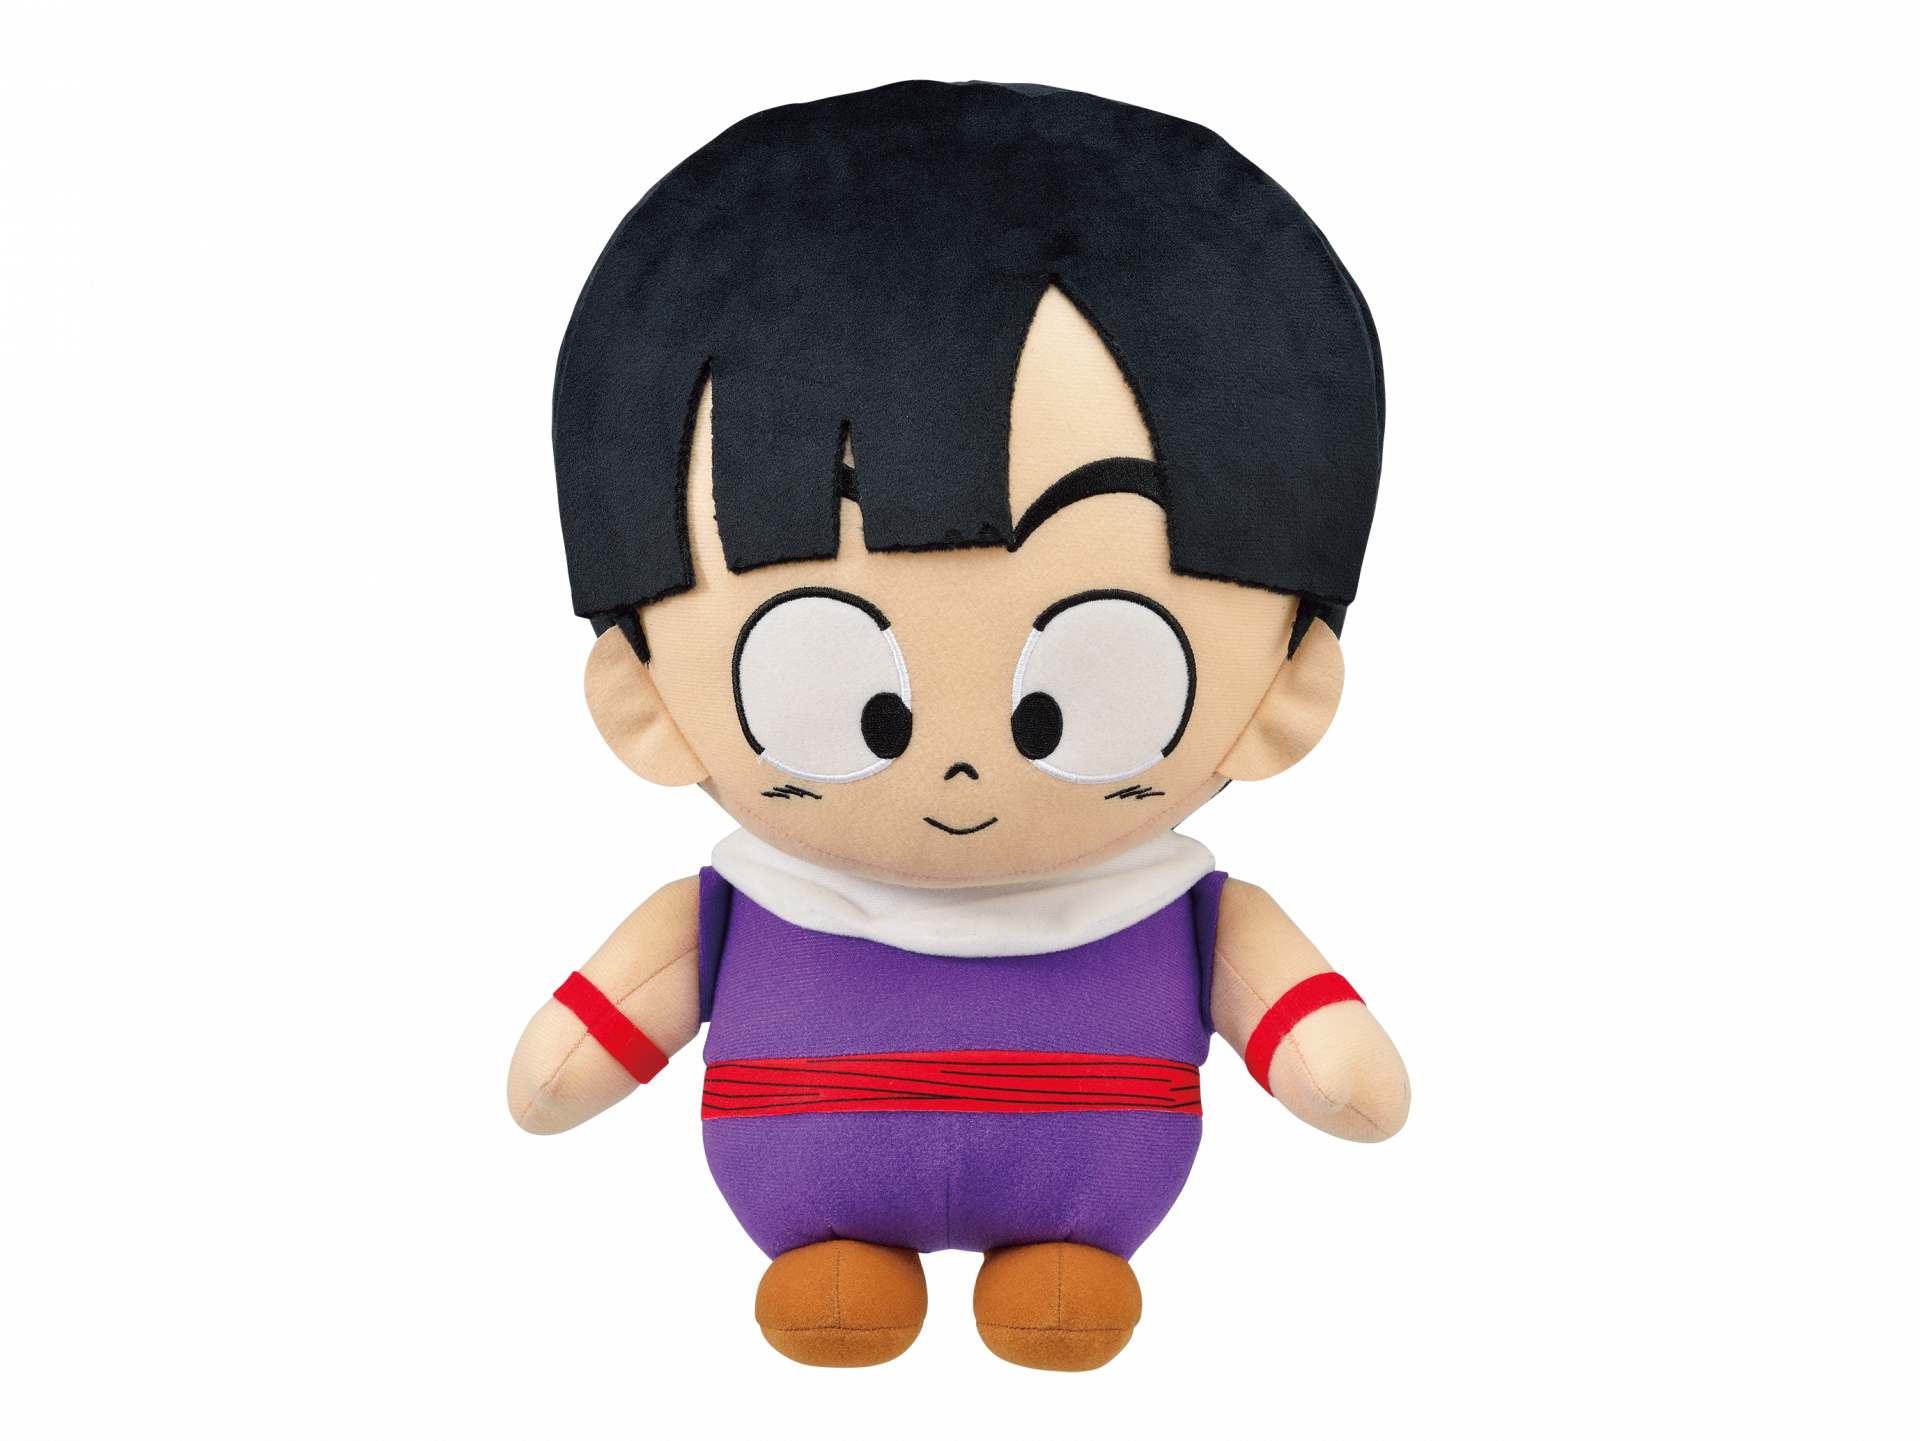 Super-Sized Gohan Plush Toy Coming to Amusement Centers in Japan!